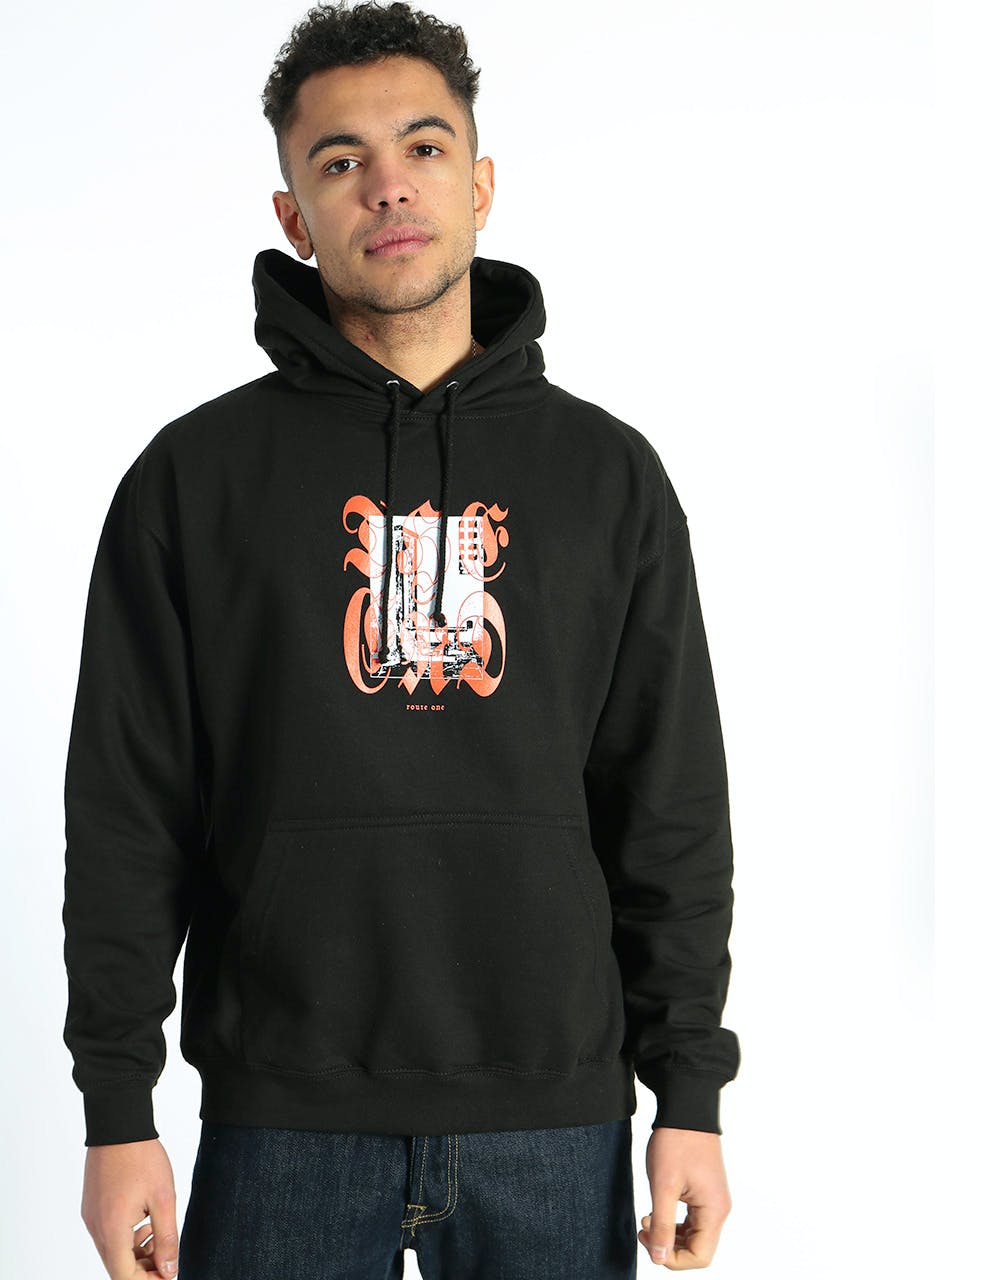 Route One The End Pullover Hoodie - Black